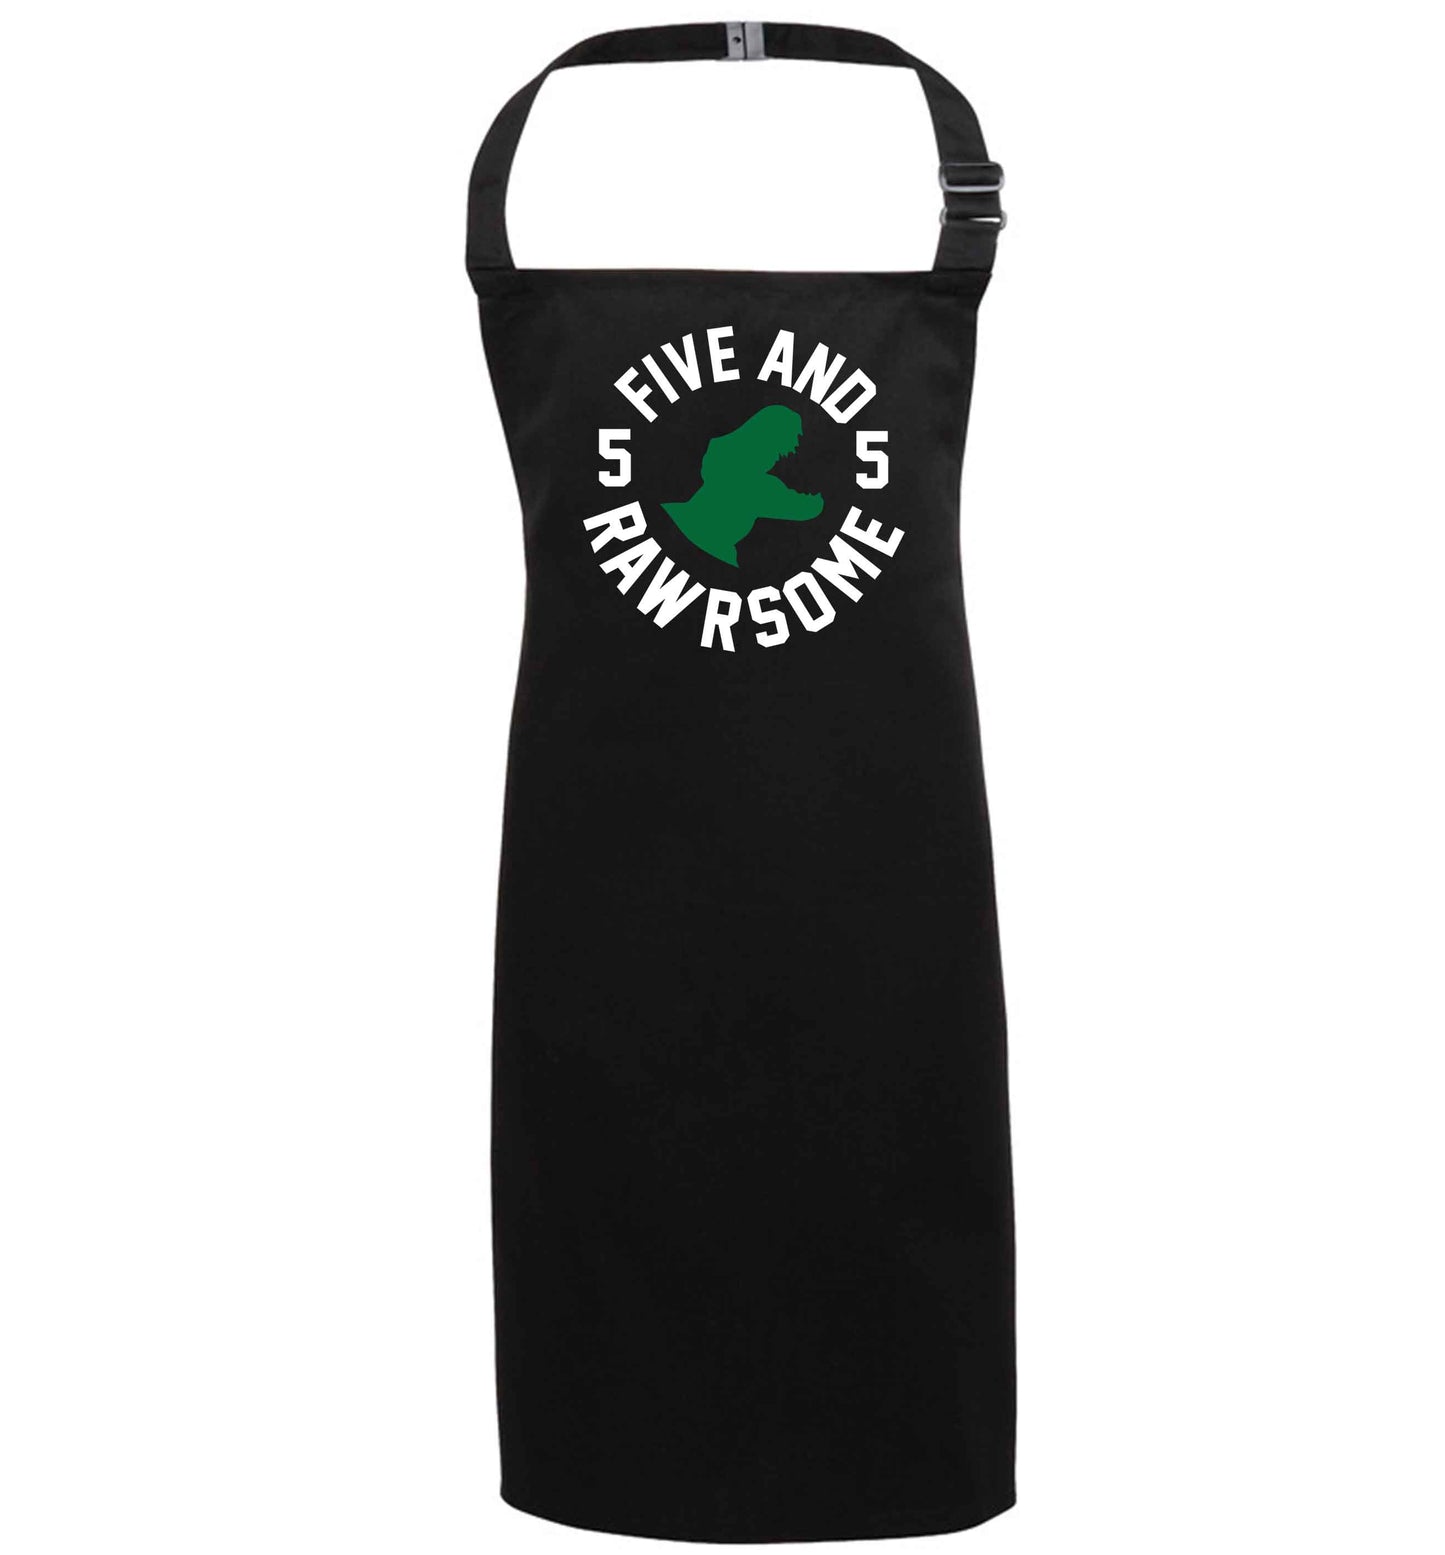 Five and rawrsome black apron 7-10 years